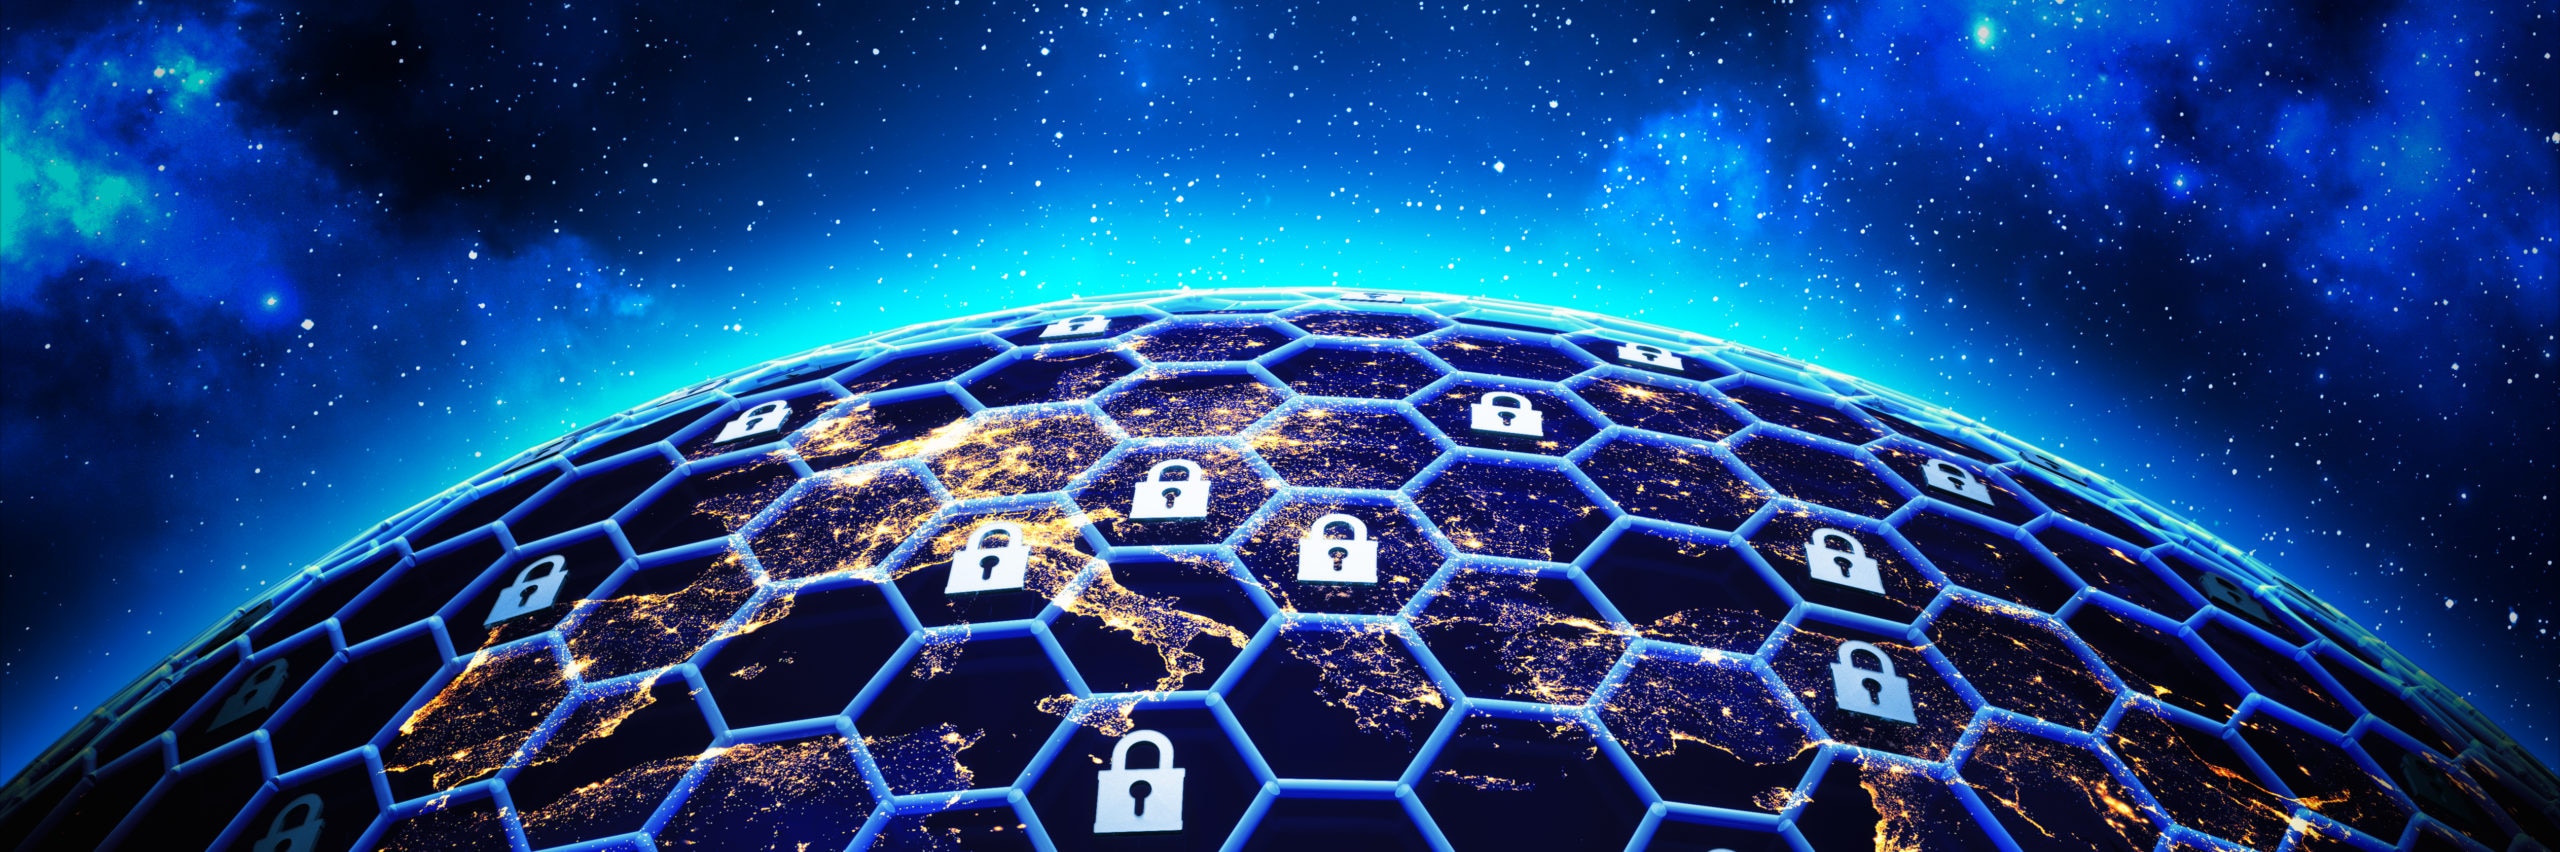 Global network security and data protection concept, a grid of cells with a lock symbol in some of them around the Earth globe on deep blue space background, 3d illustration - Illustration